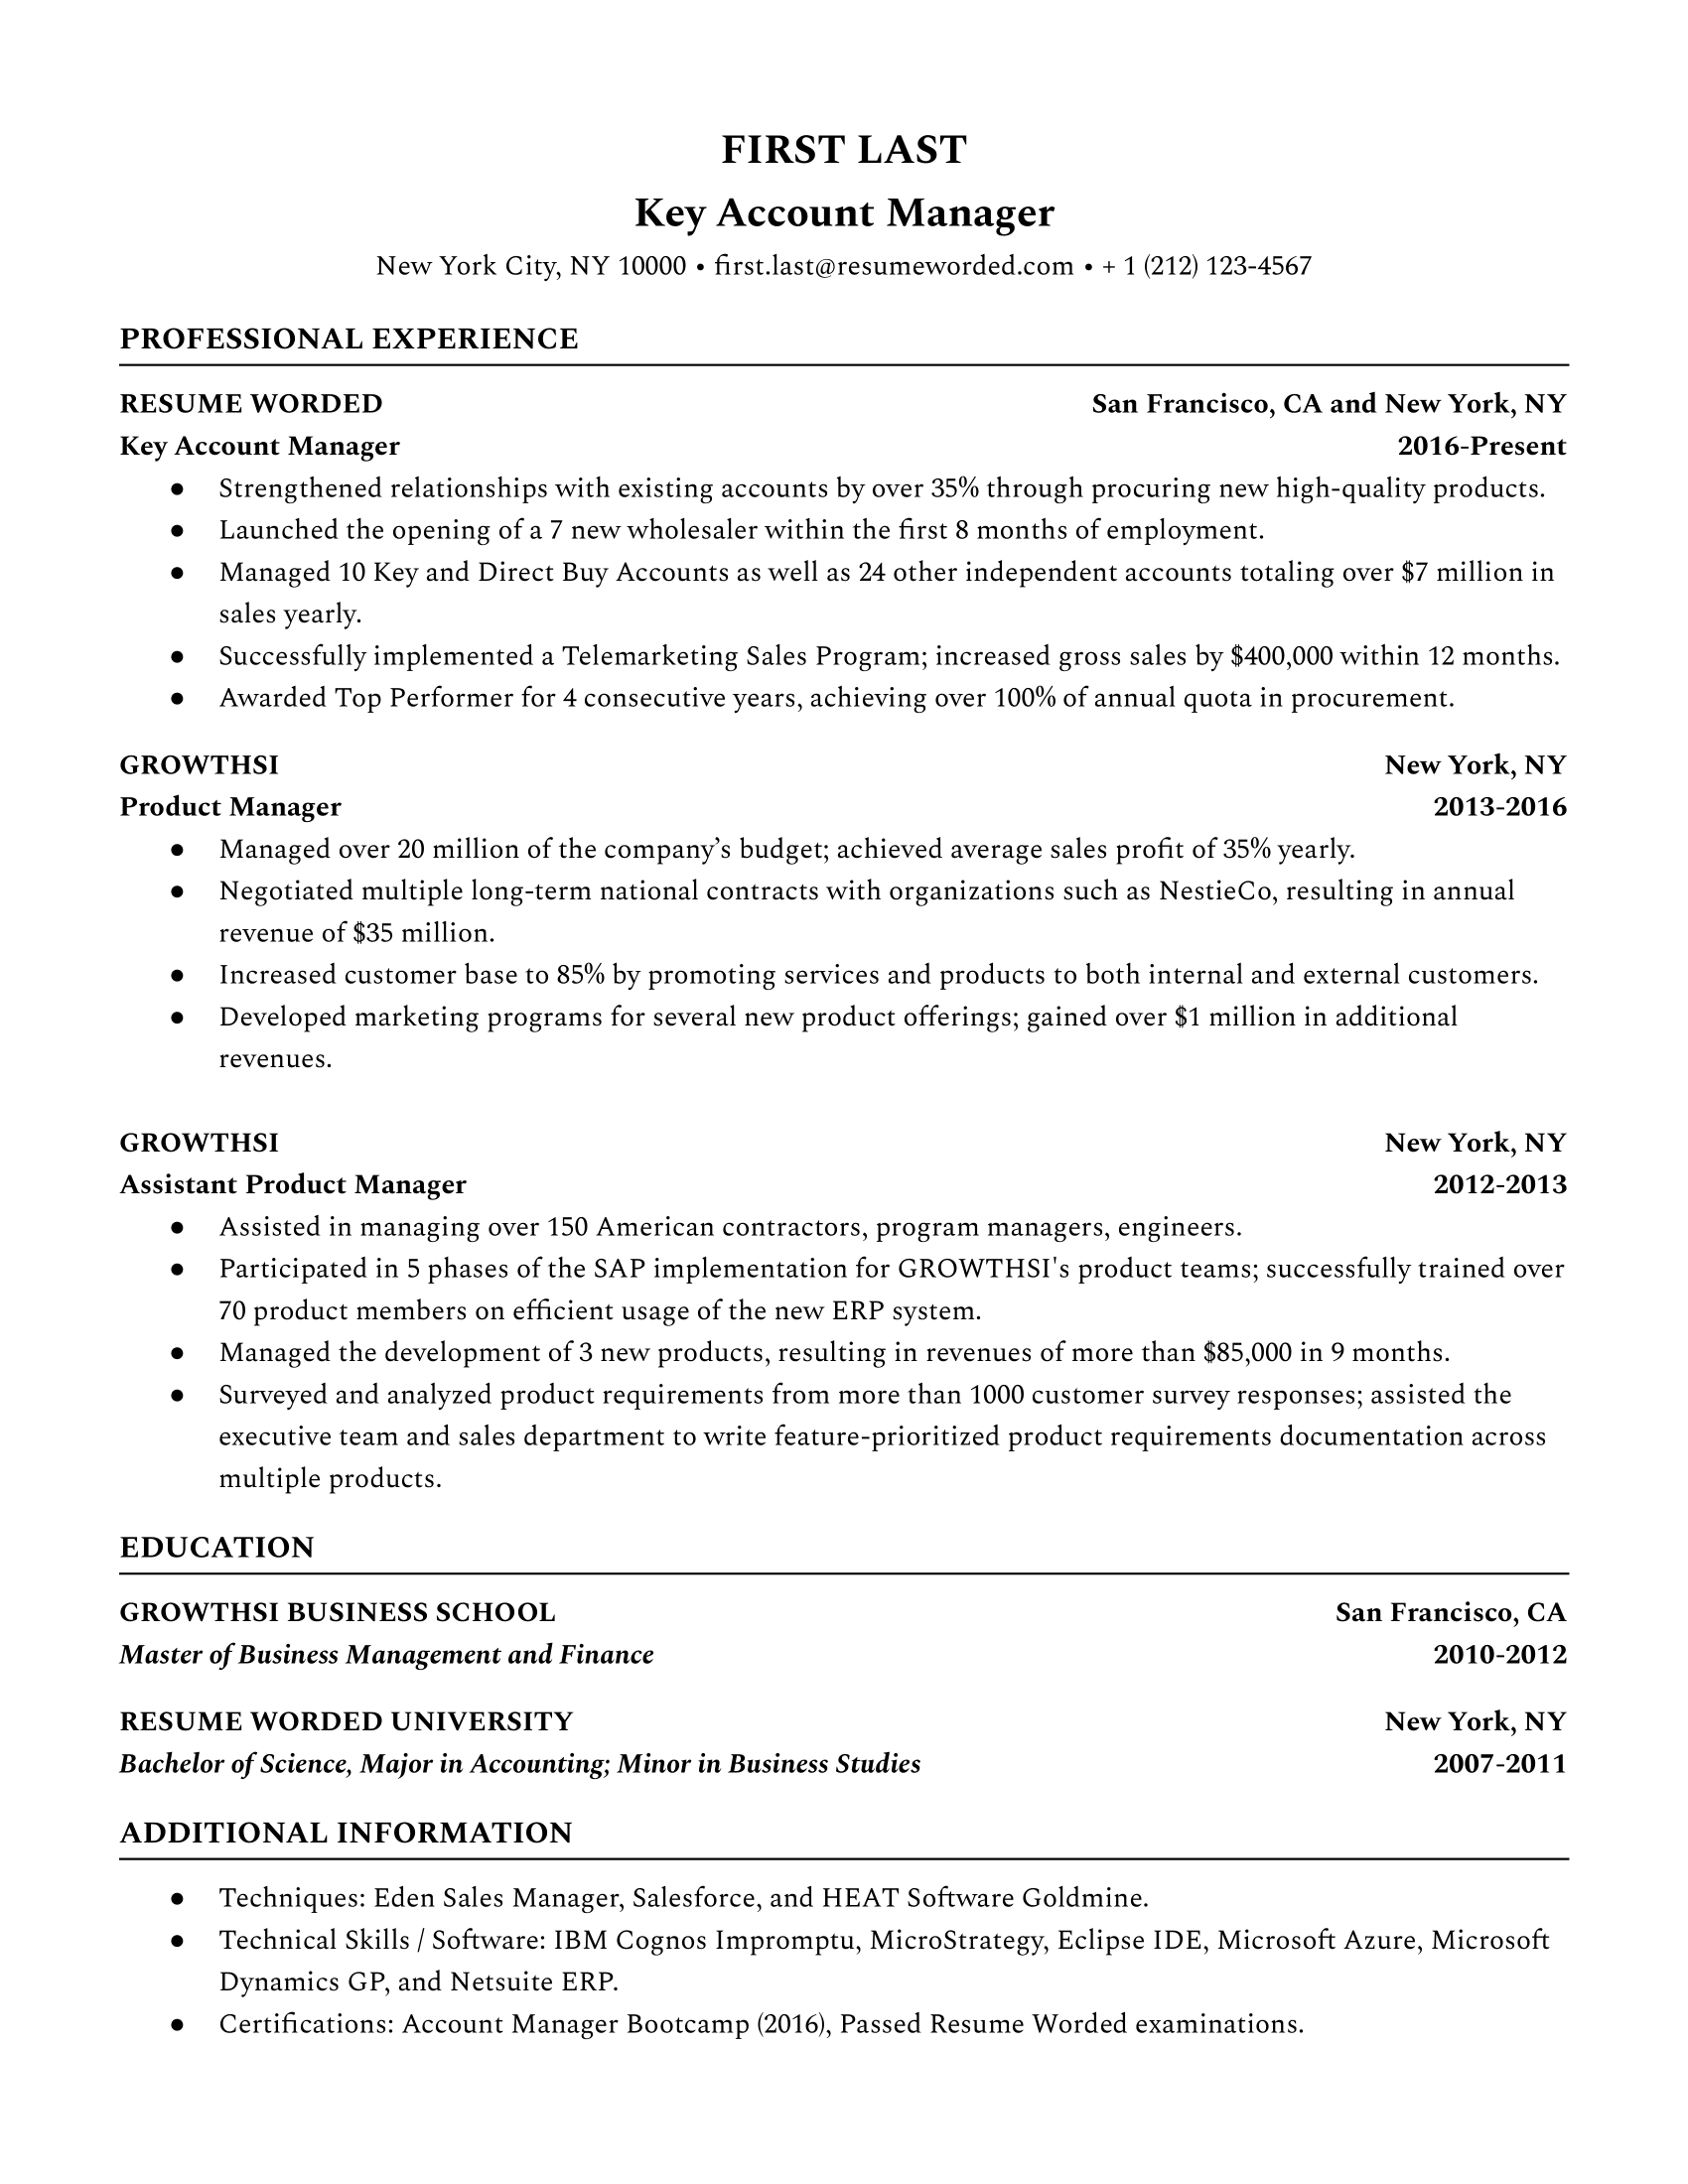 Key Account Manager Resume Sample